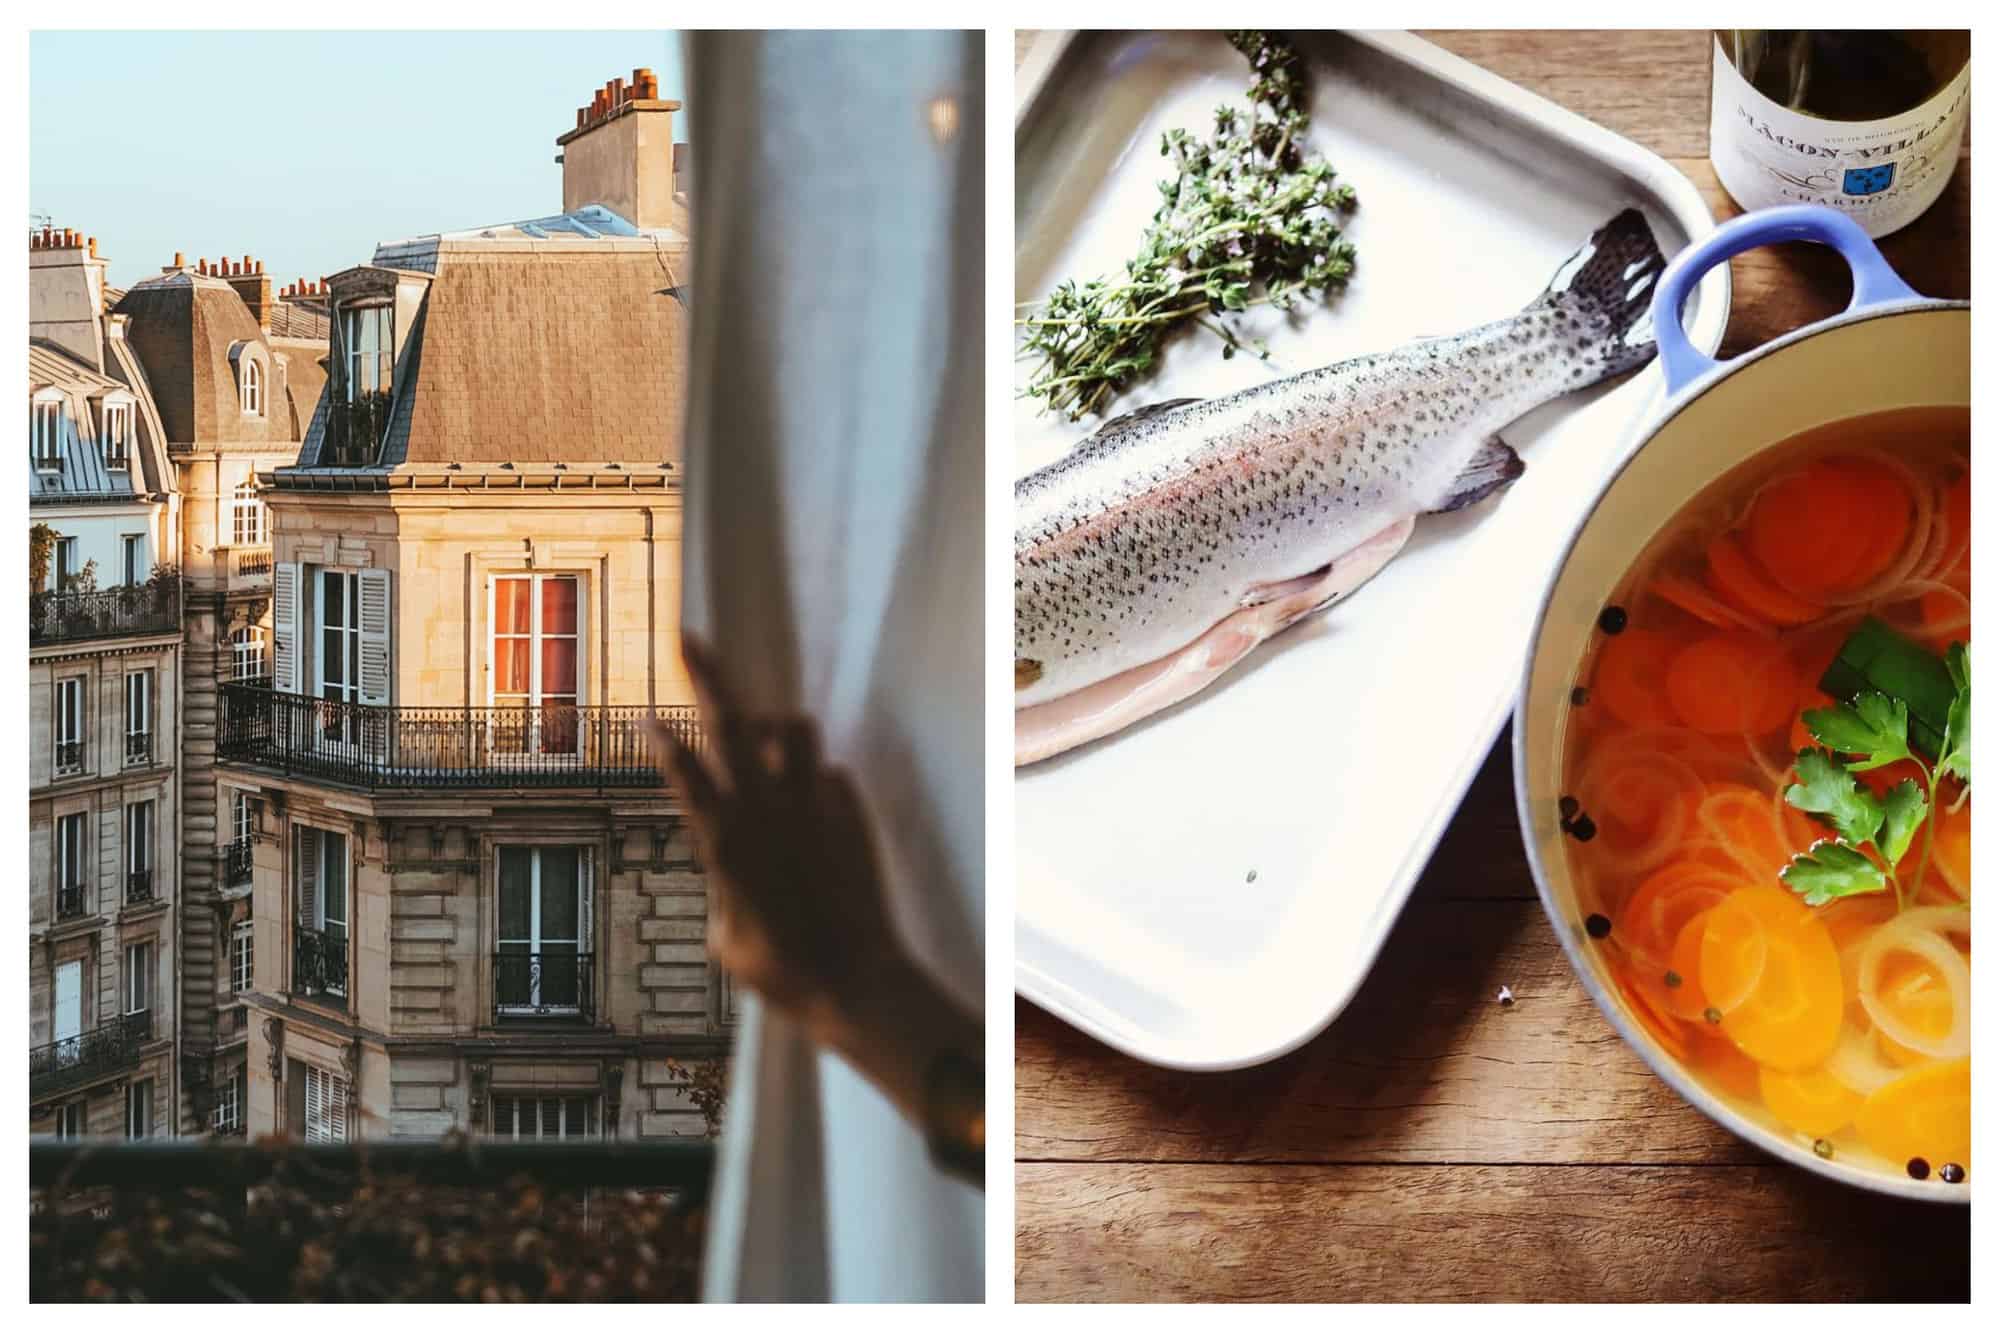 Left- A hand opens the curtains to shown a view of traditional French buildings. Right- An uncooked fish sits nest to a pot filled with stock. 